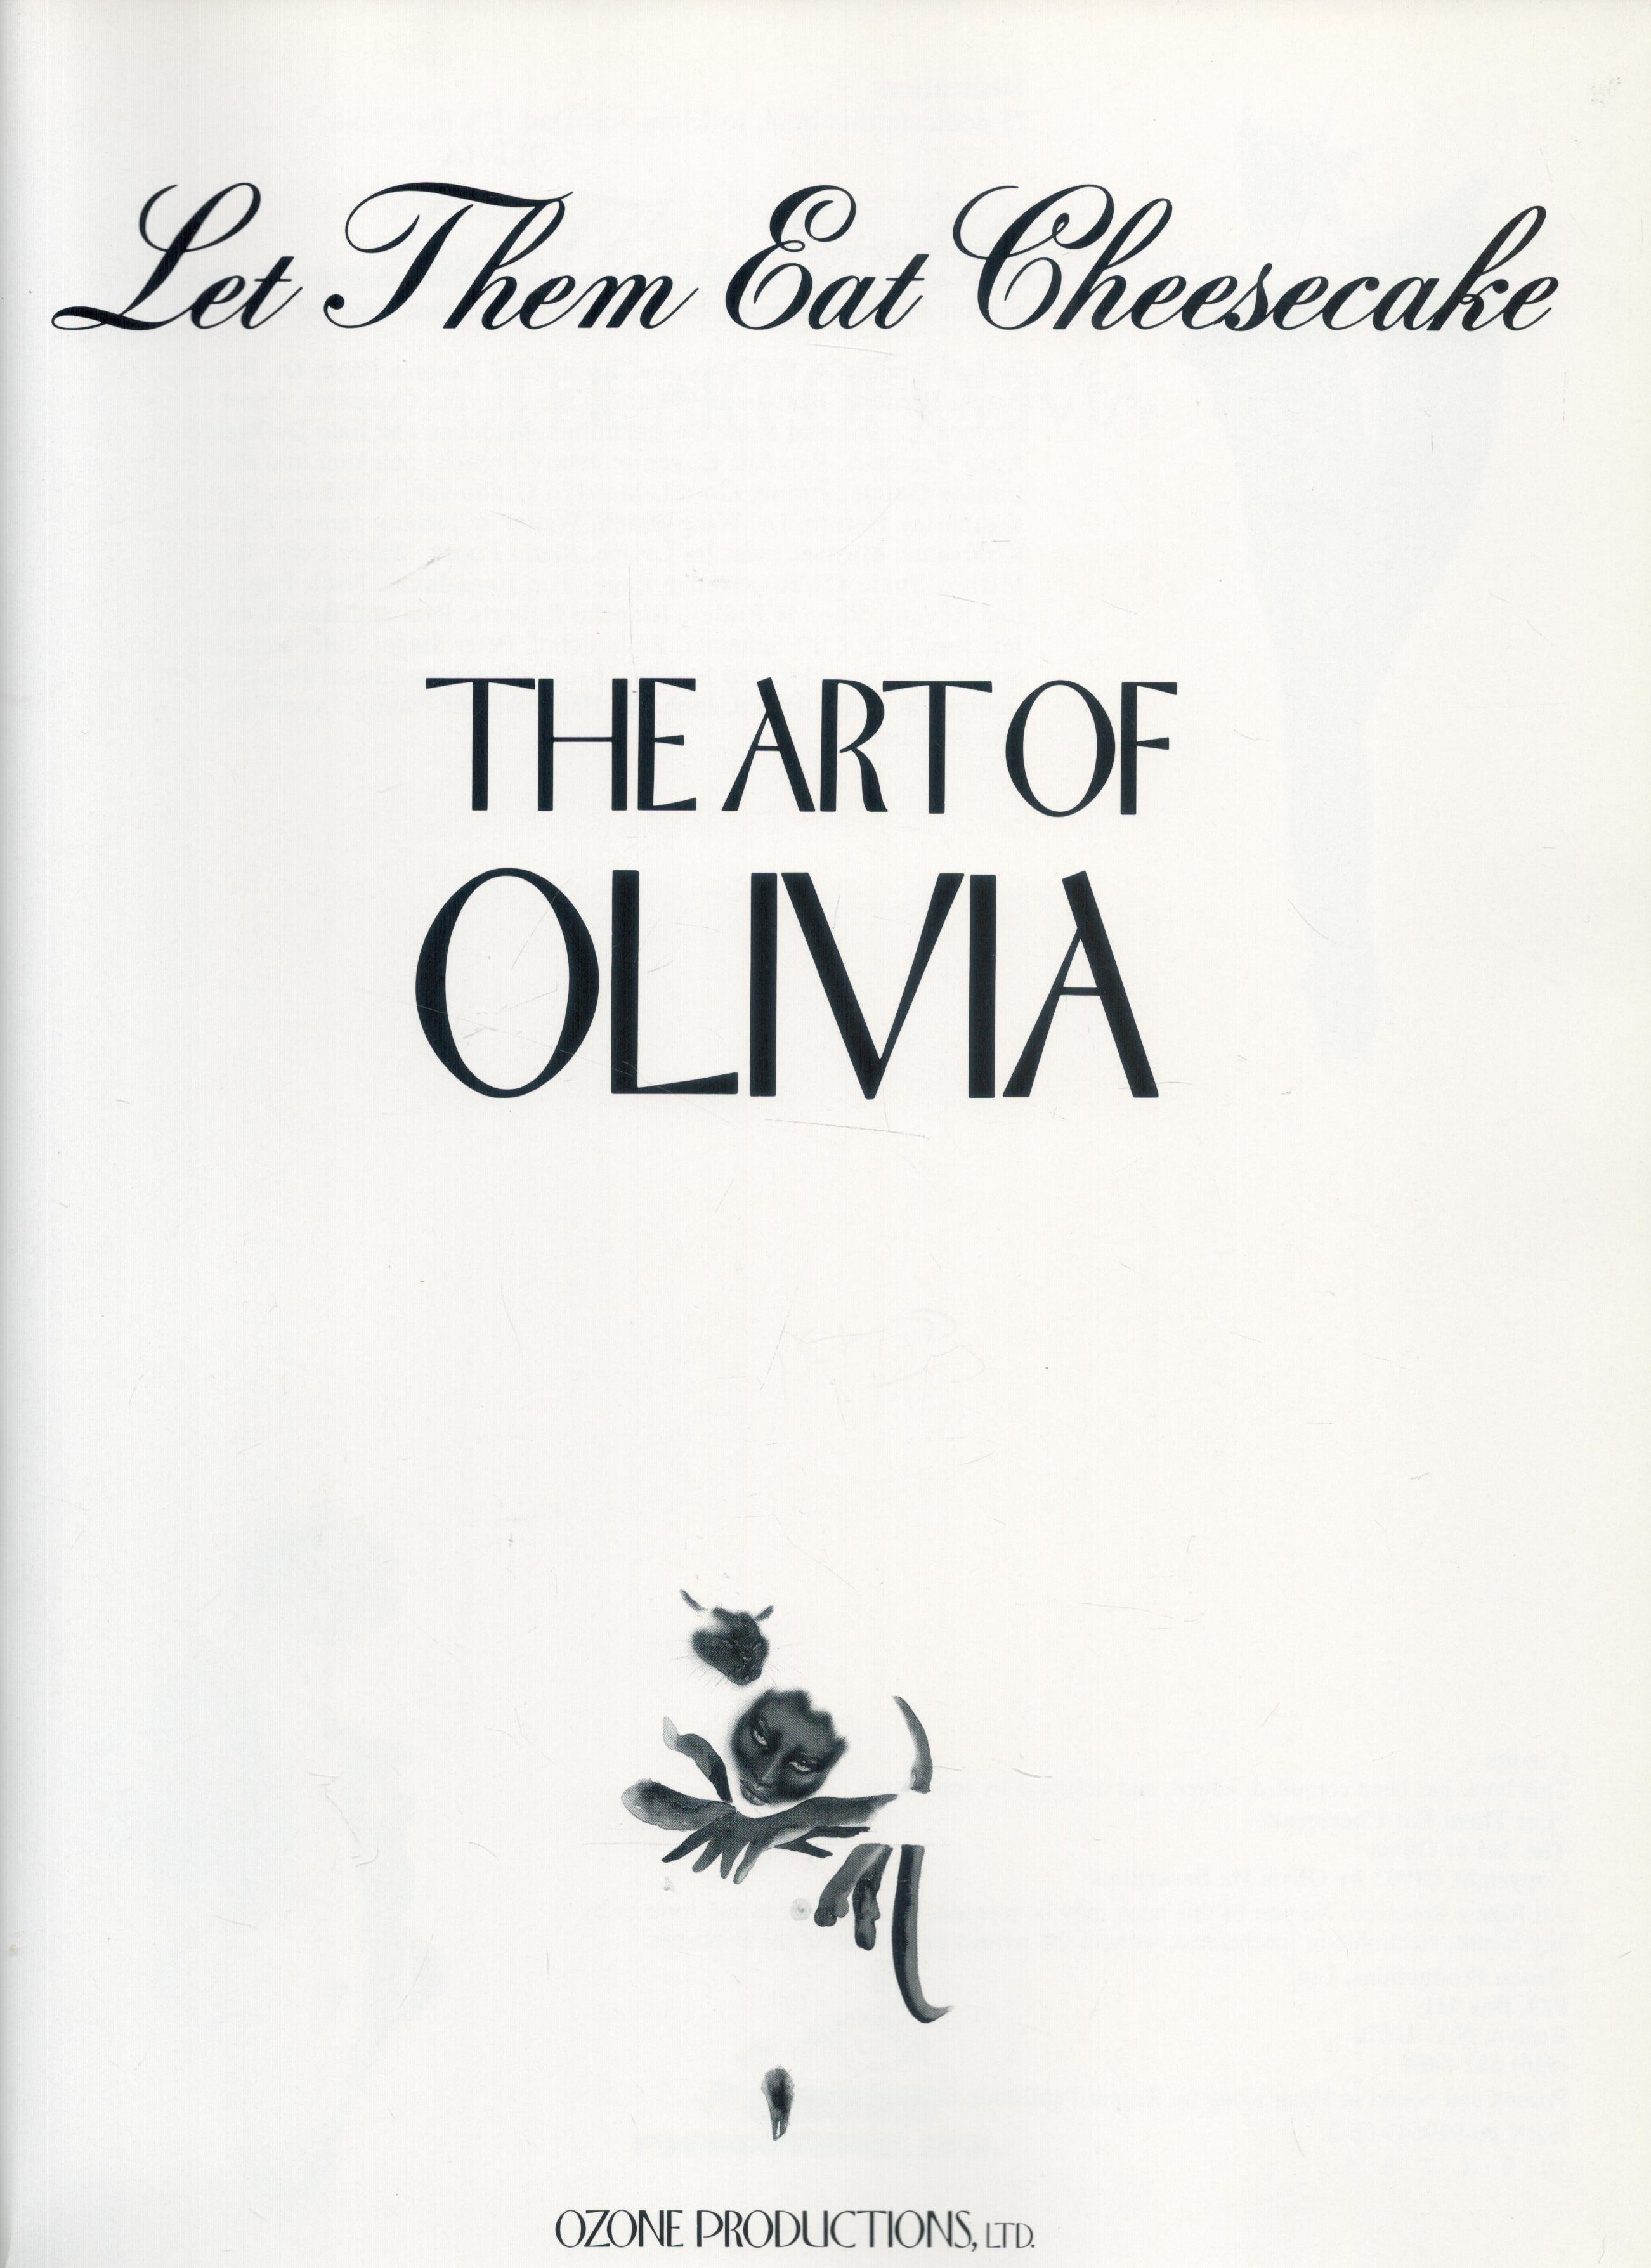 The Art of Olivia - Let Them Eat Cheesecake Edited by Joel Beren 1993 First Edition Hardback Book - Image 2 of 3